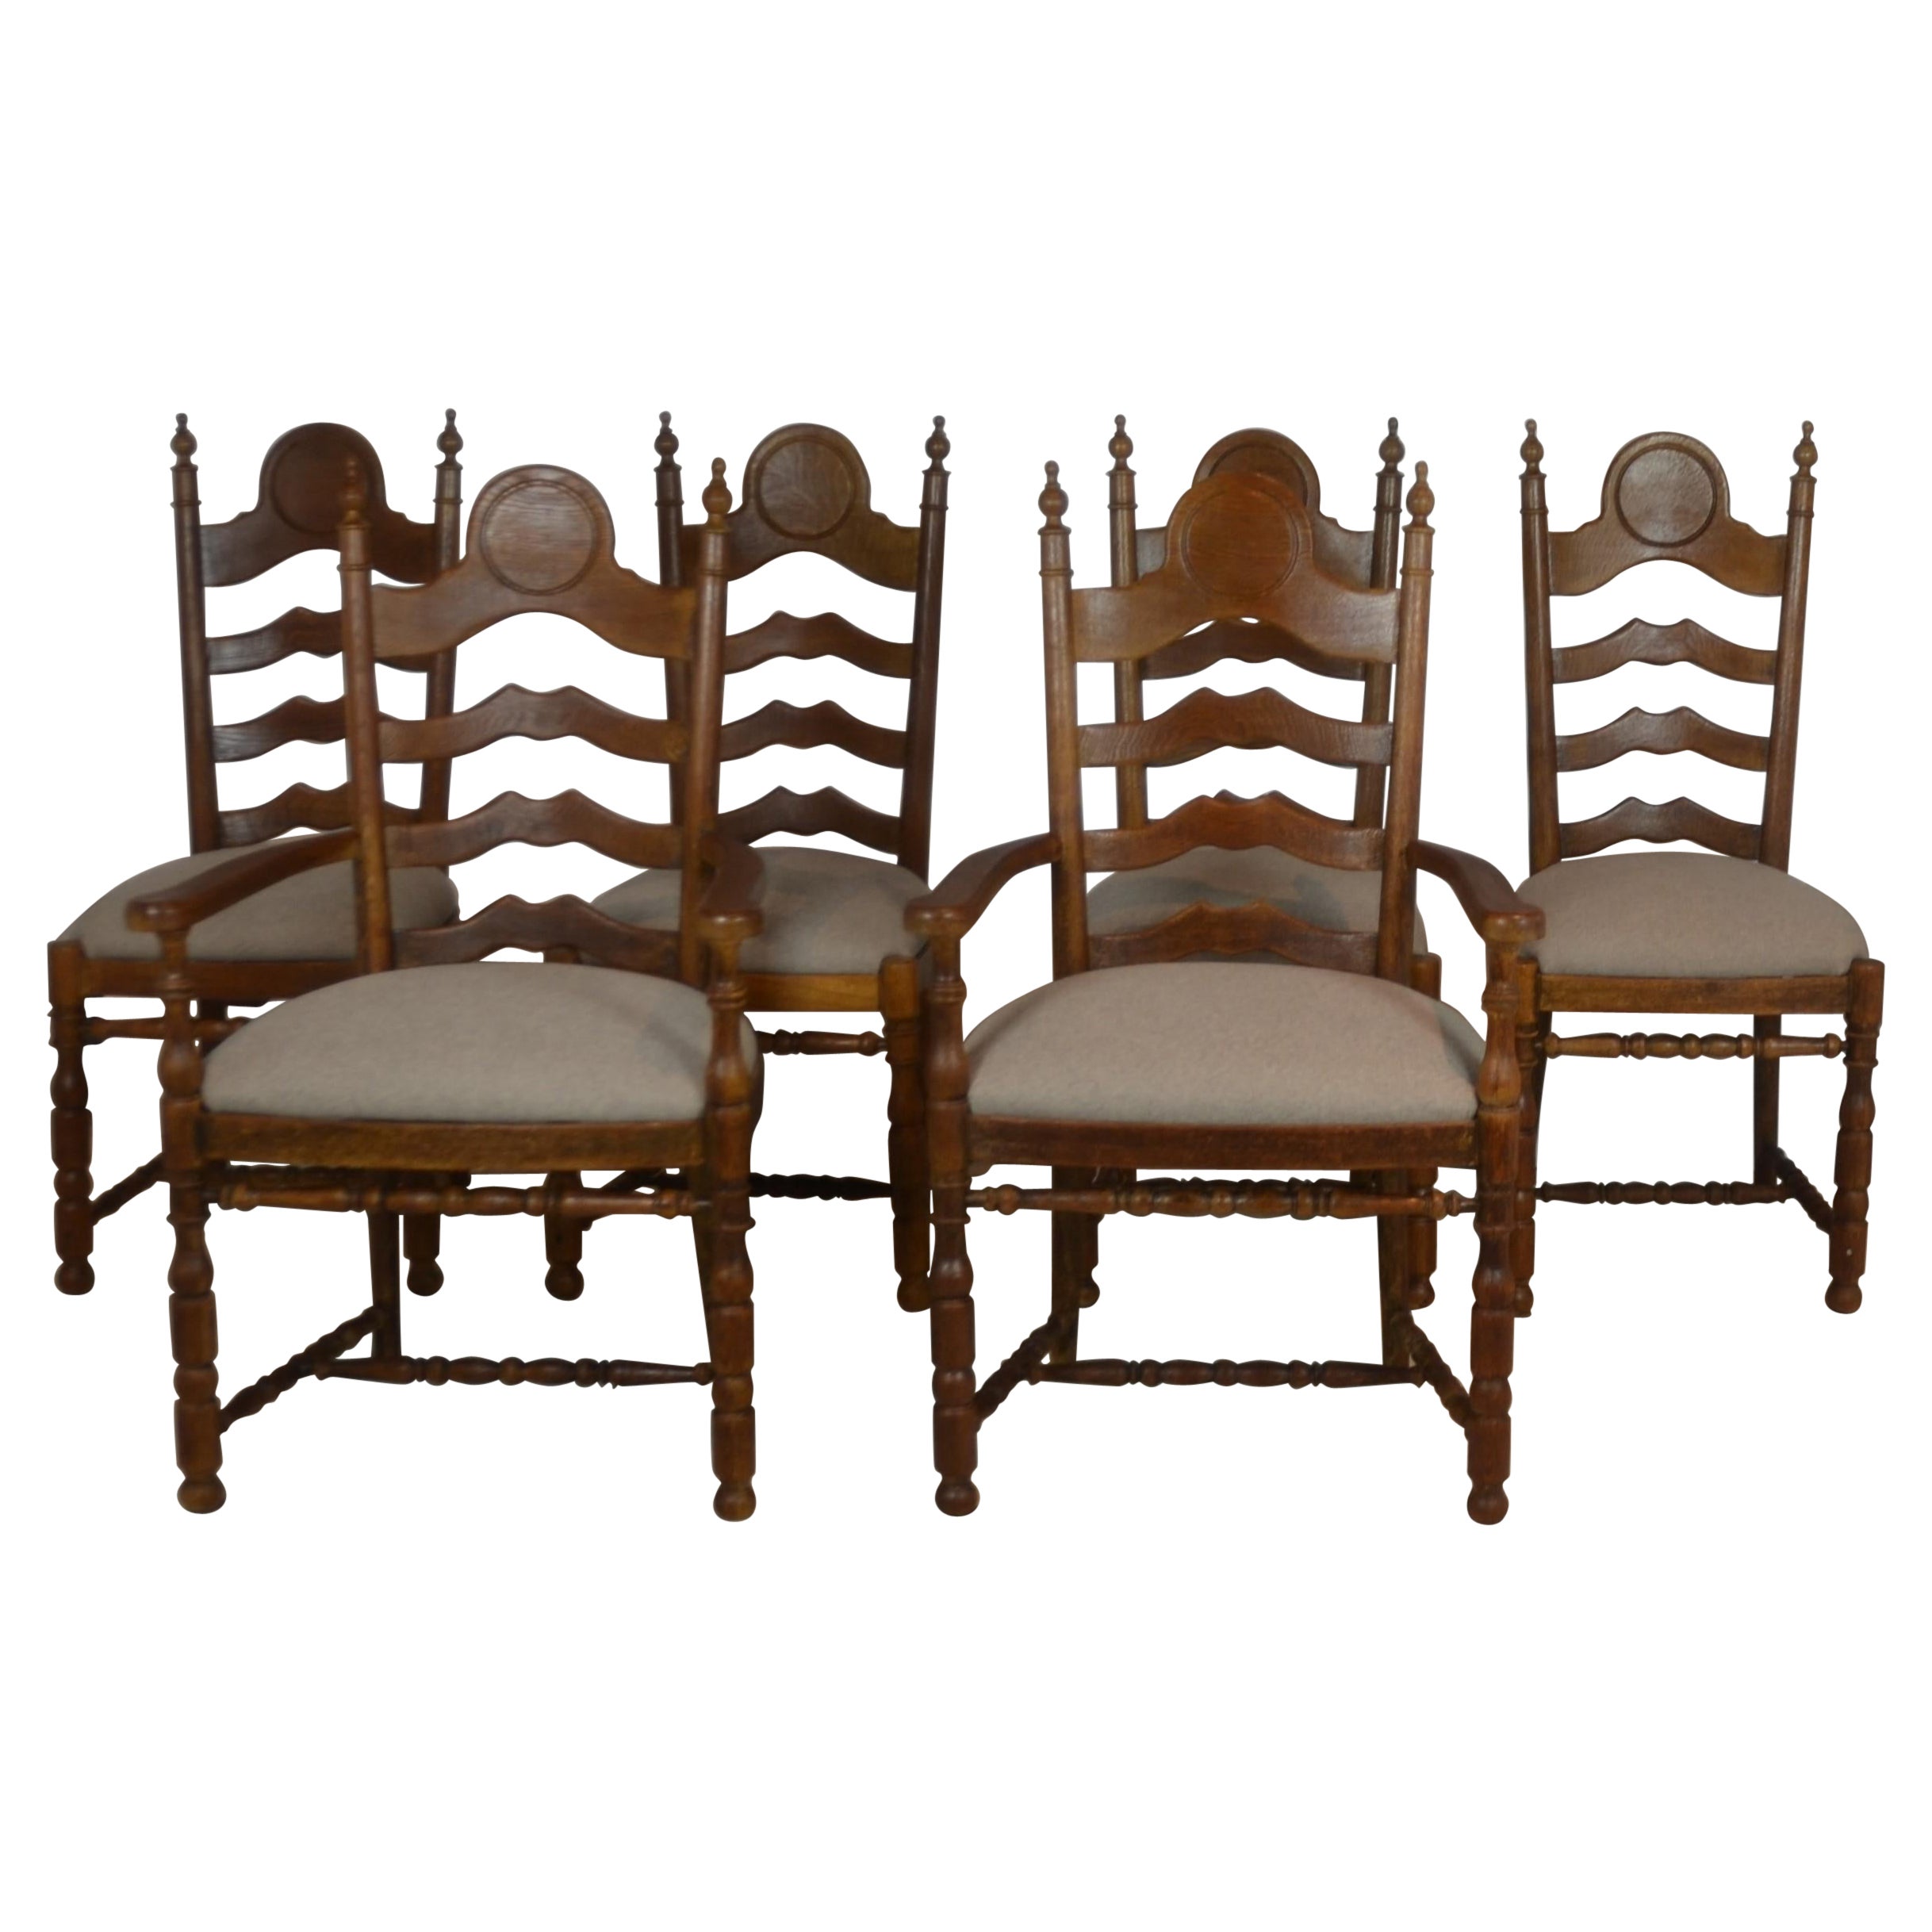 Ladder Back Dining Chairs Set of 6